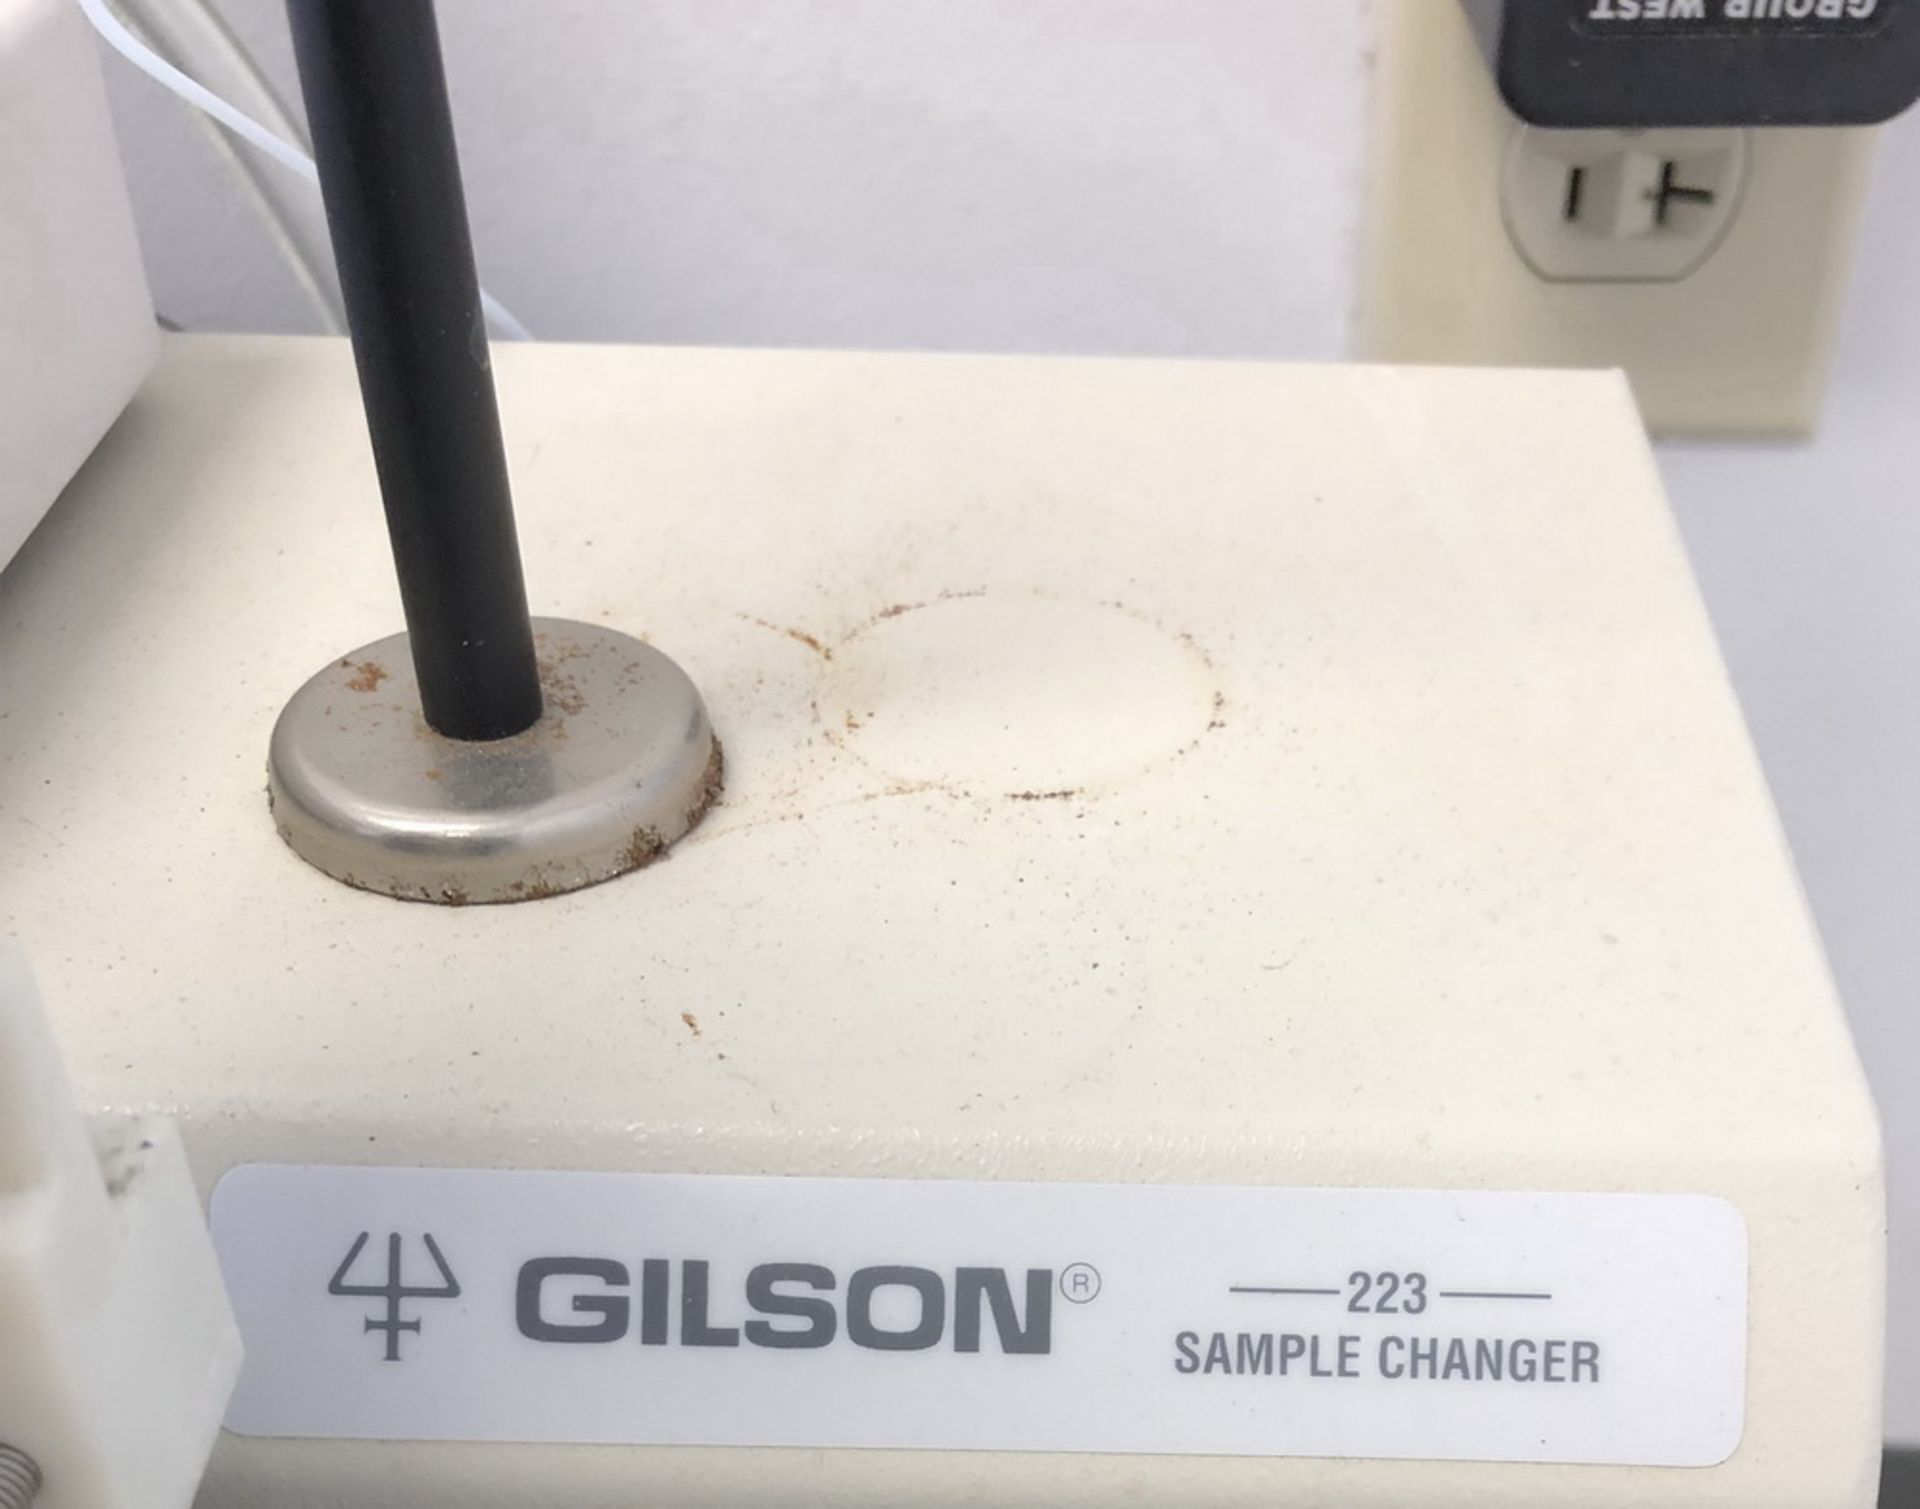 Gilson 223 Sample Changer with Gilson Minipuls3 Peristaltic Pump - Image 3 of 3